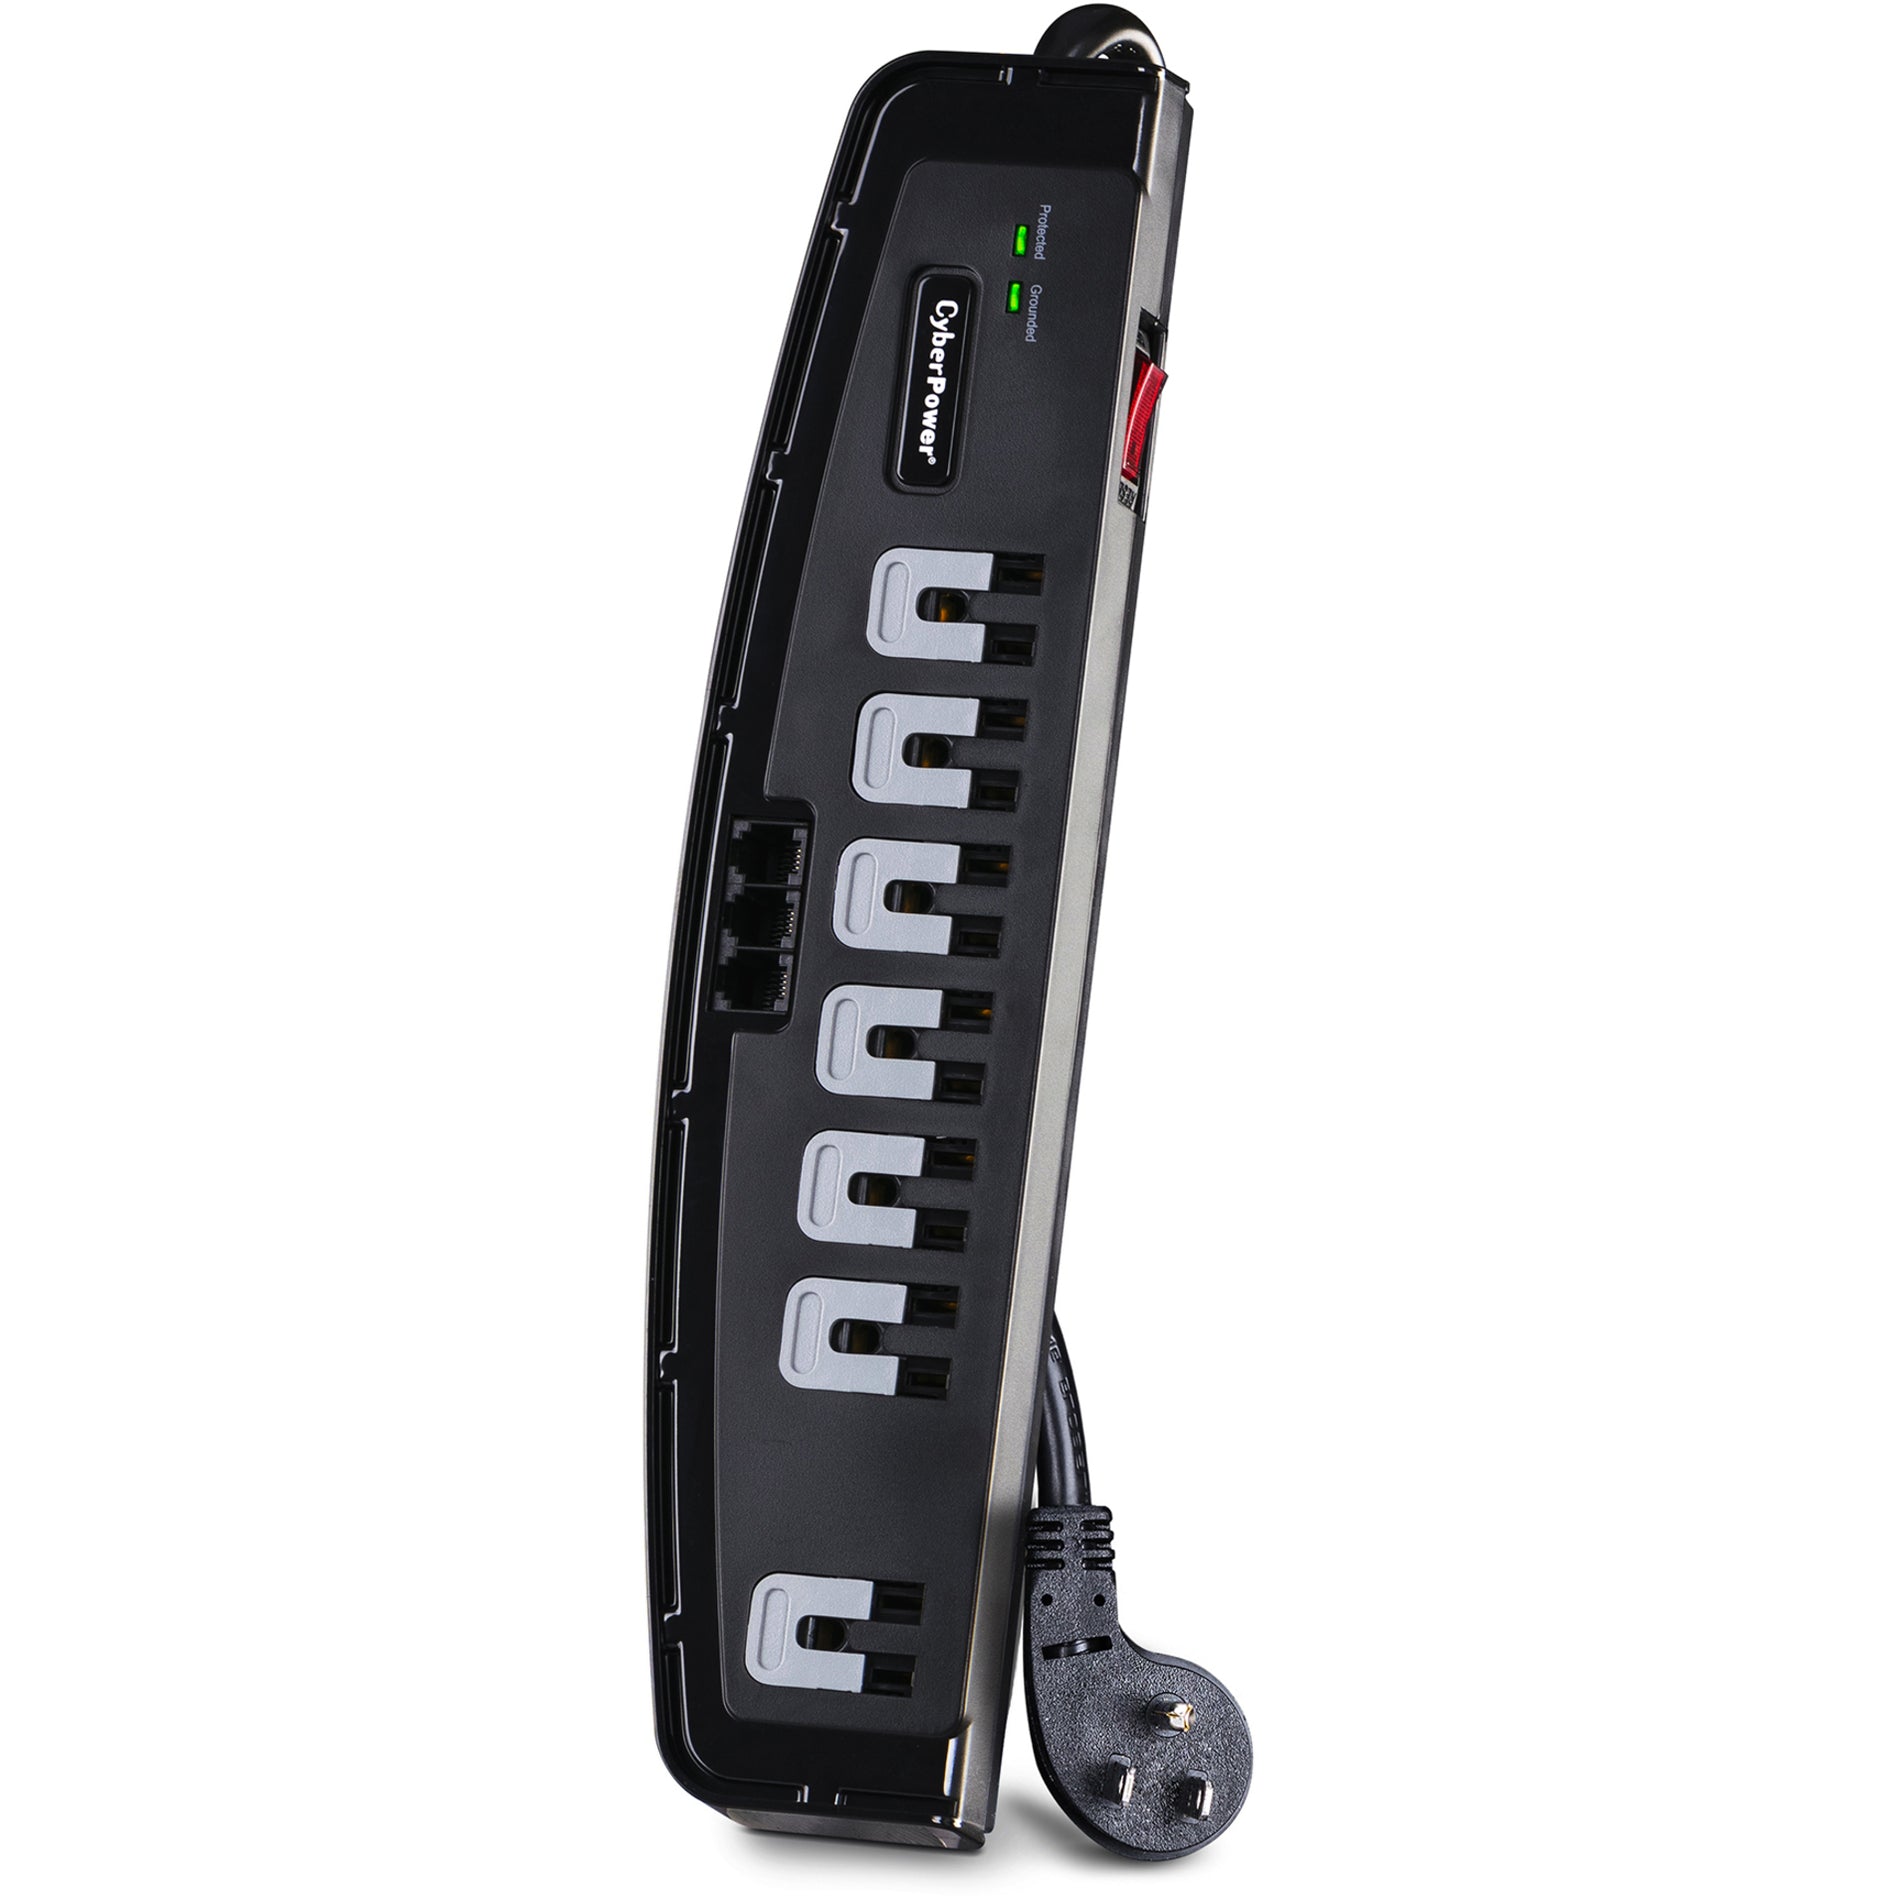 CyberPower Professional 7-Outlet Surge Suppressor with 1650 J [Discontinued]